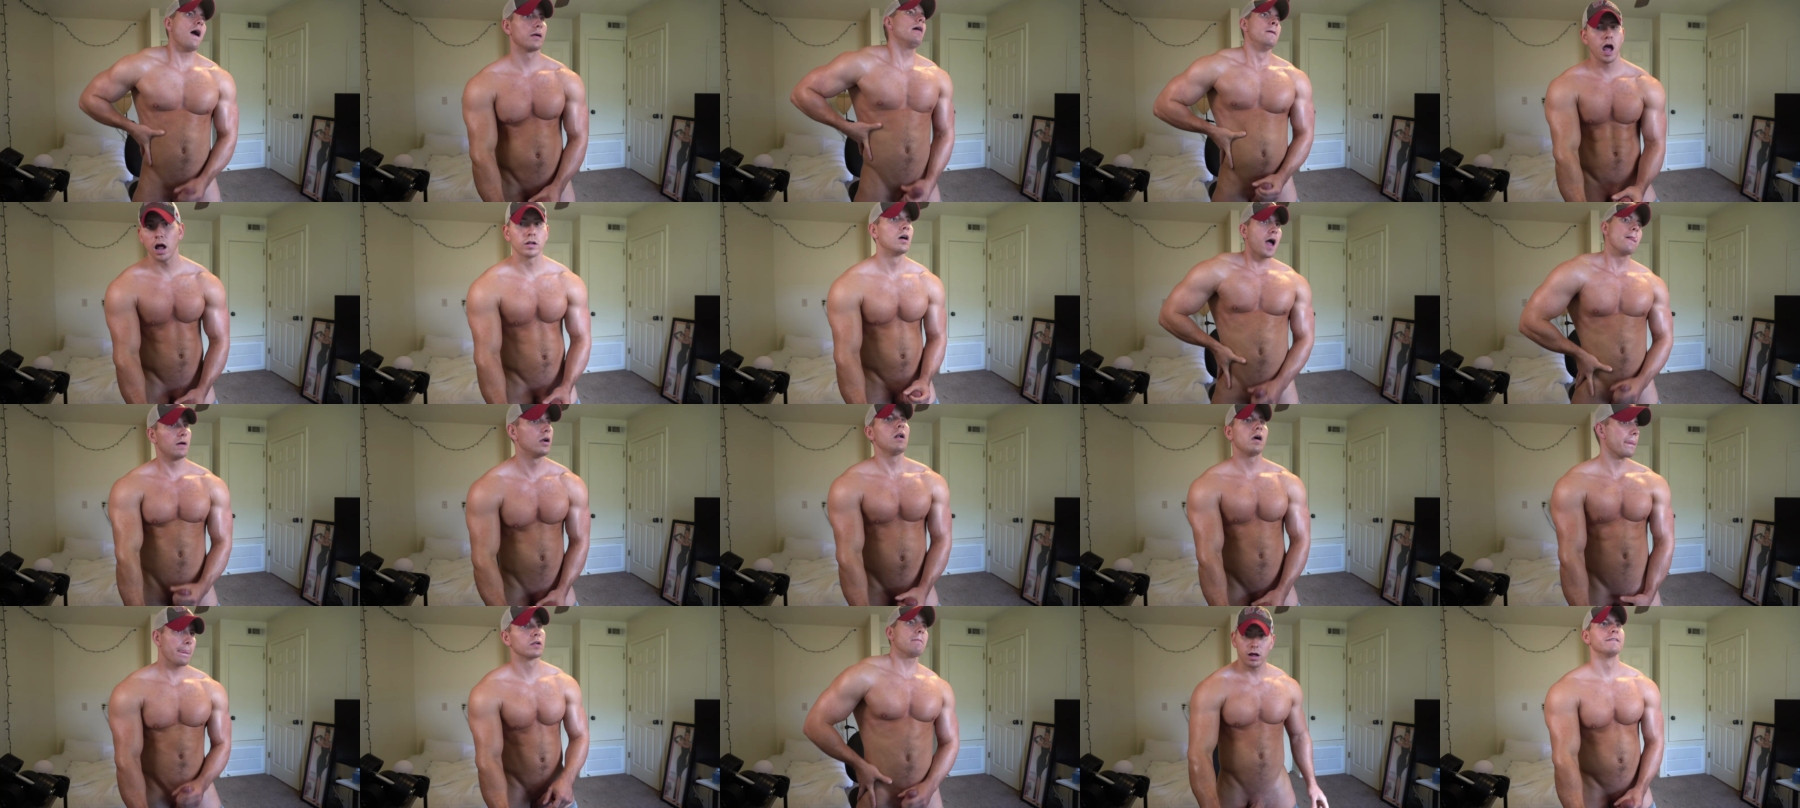 Hotmuscles6t9  14-05-2021 Male Video